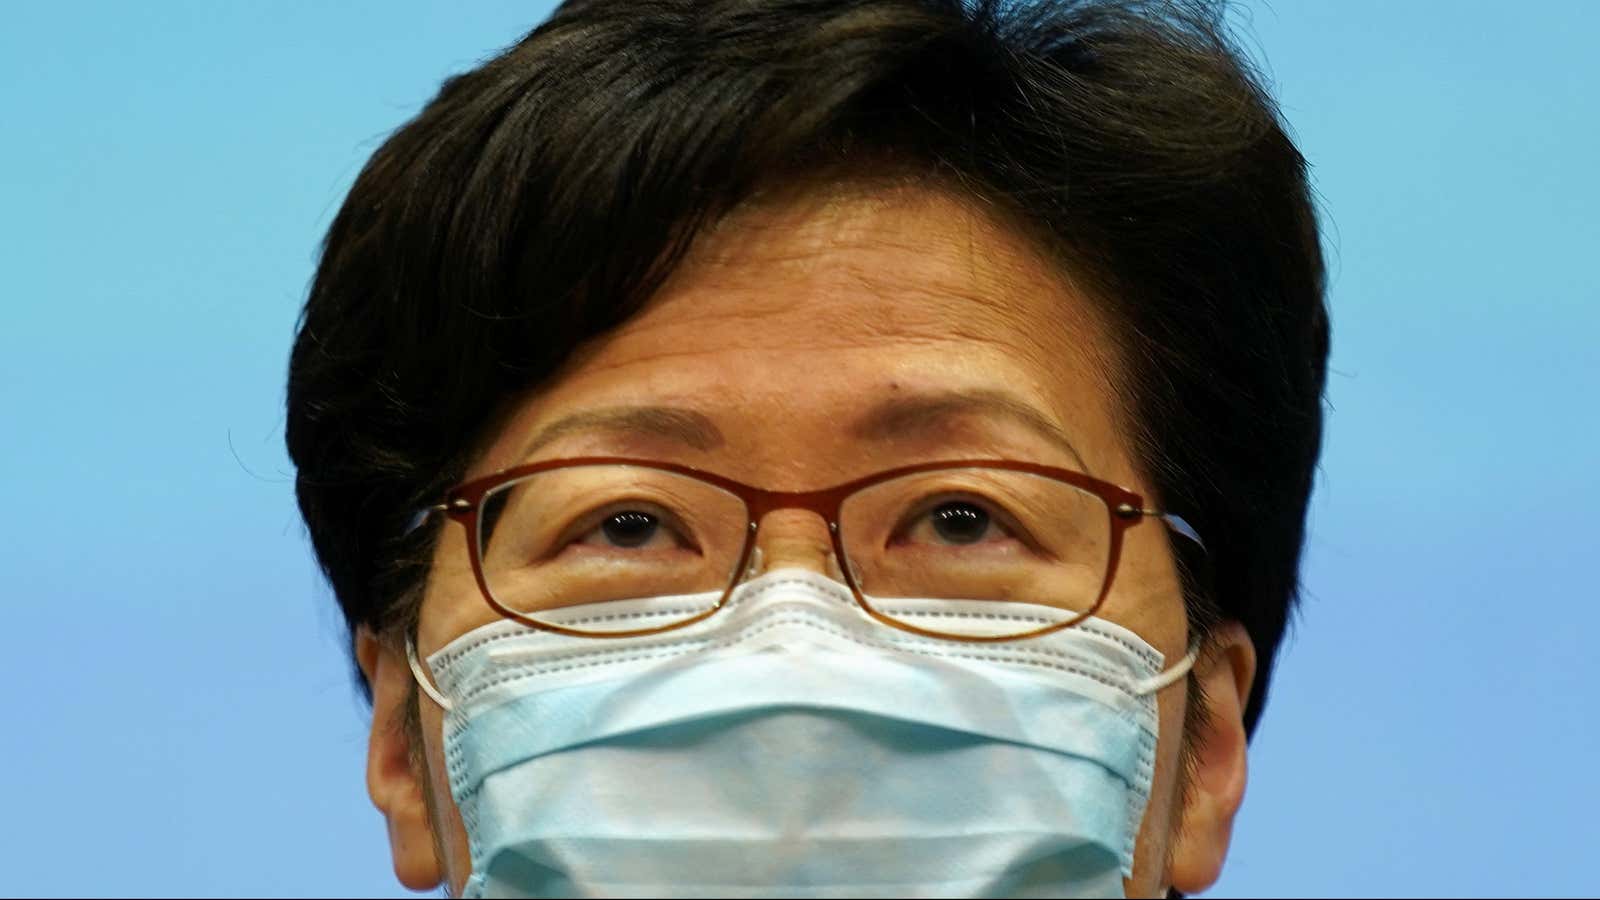 Carrie Lam has become the face of the pro-sanctions movement in the UK for her role in allowing Beijing to expand its influence in Hong Kong.